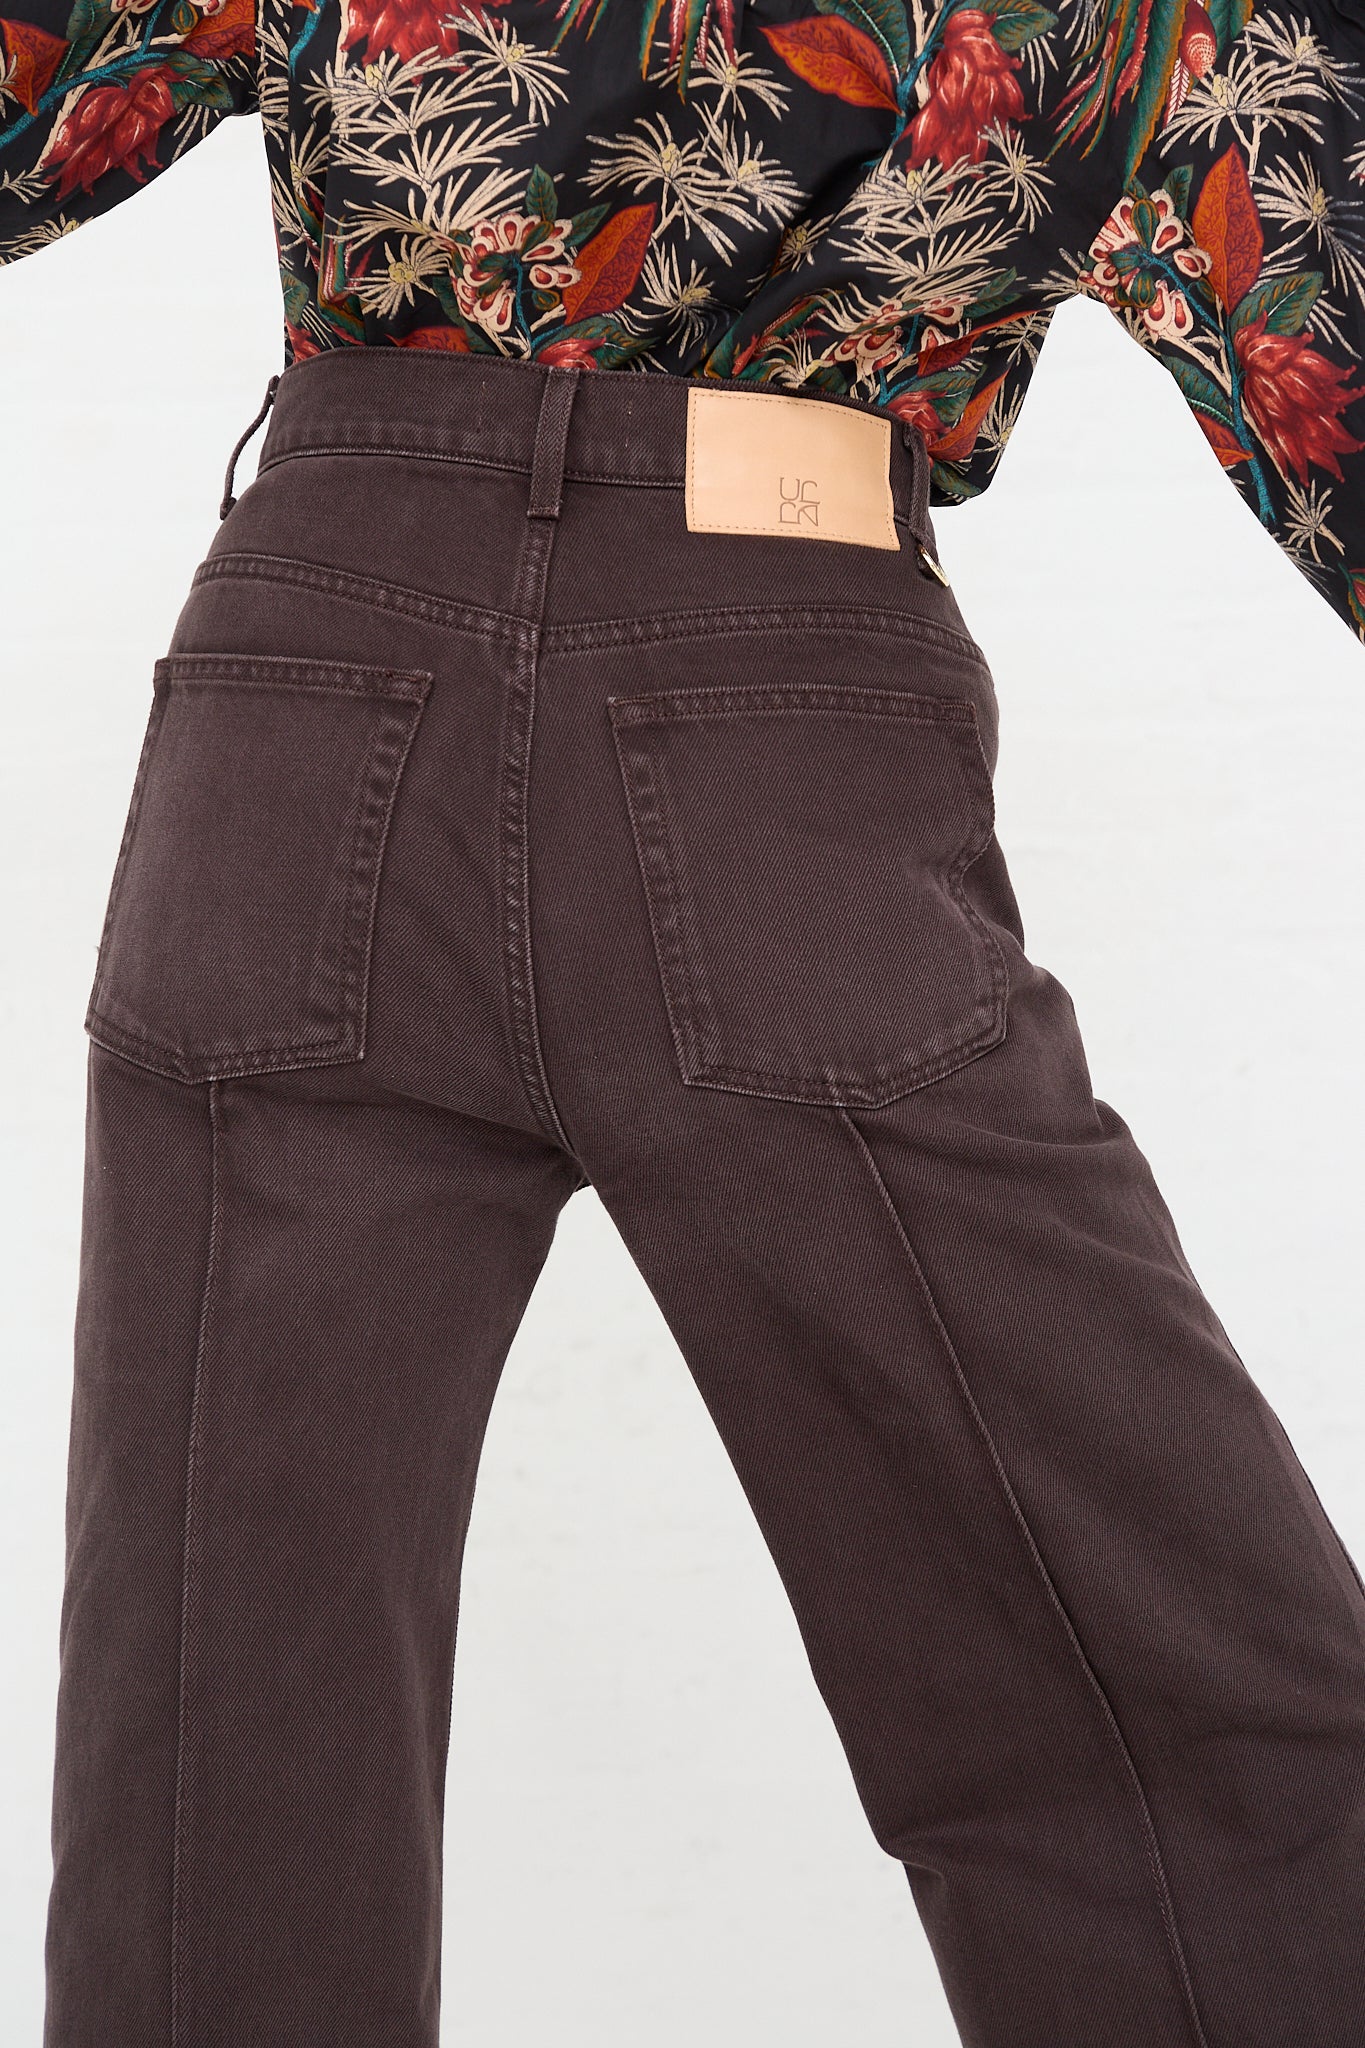 A woman in a floral shirt is wearing a pair of Ulla Johnson's Genevieve Jean in Mahogany Wash.